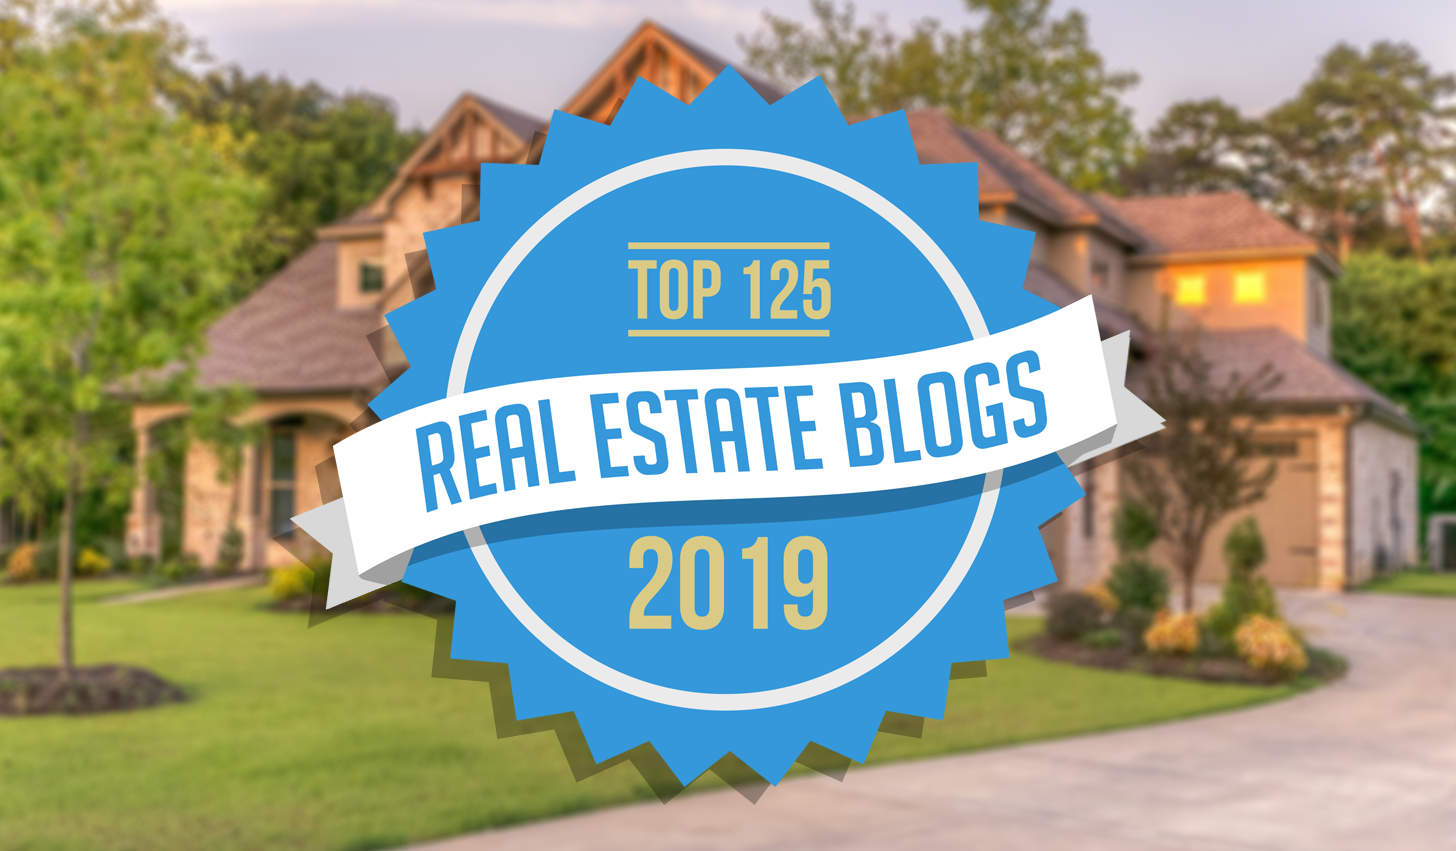 The Top 125 Real Estate Blogs in 2019